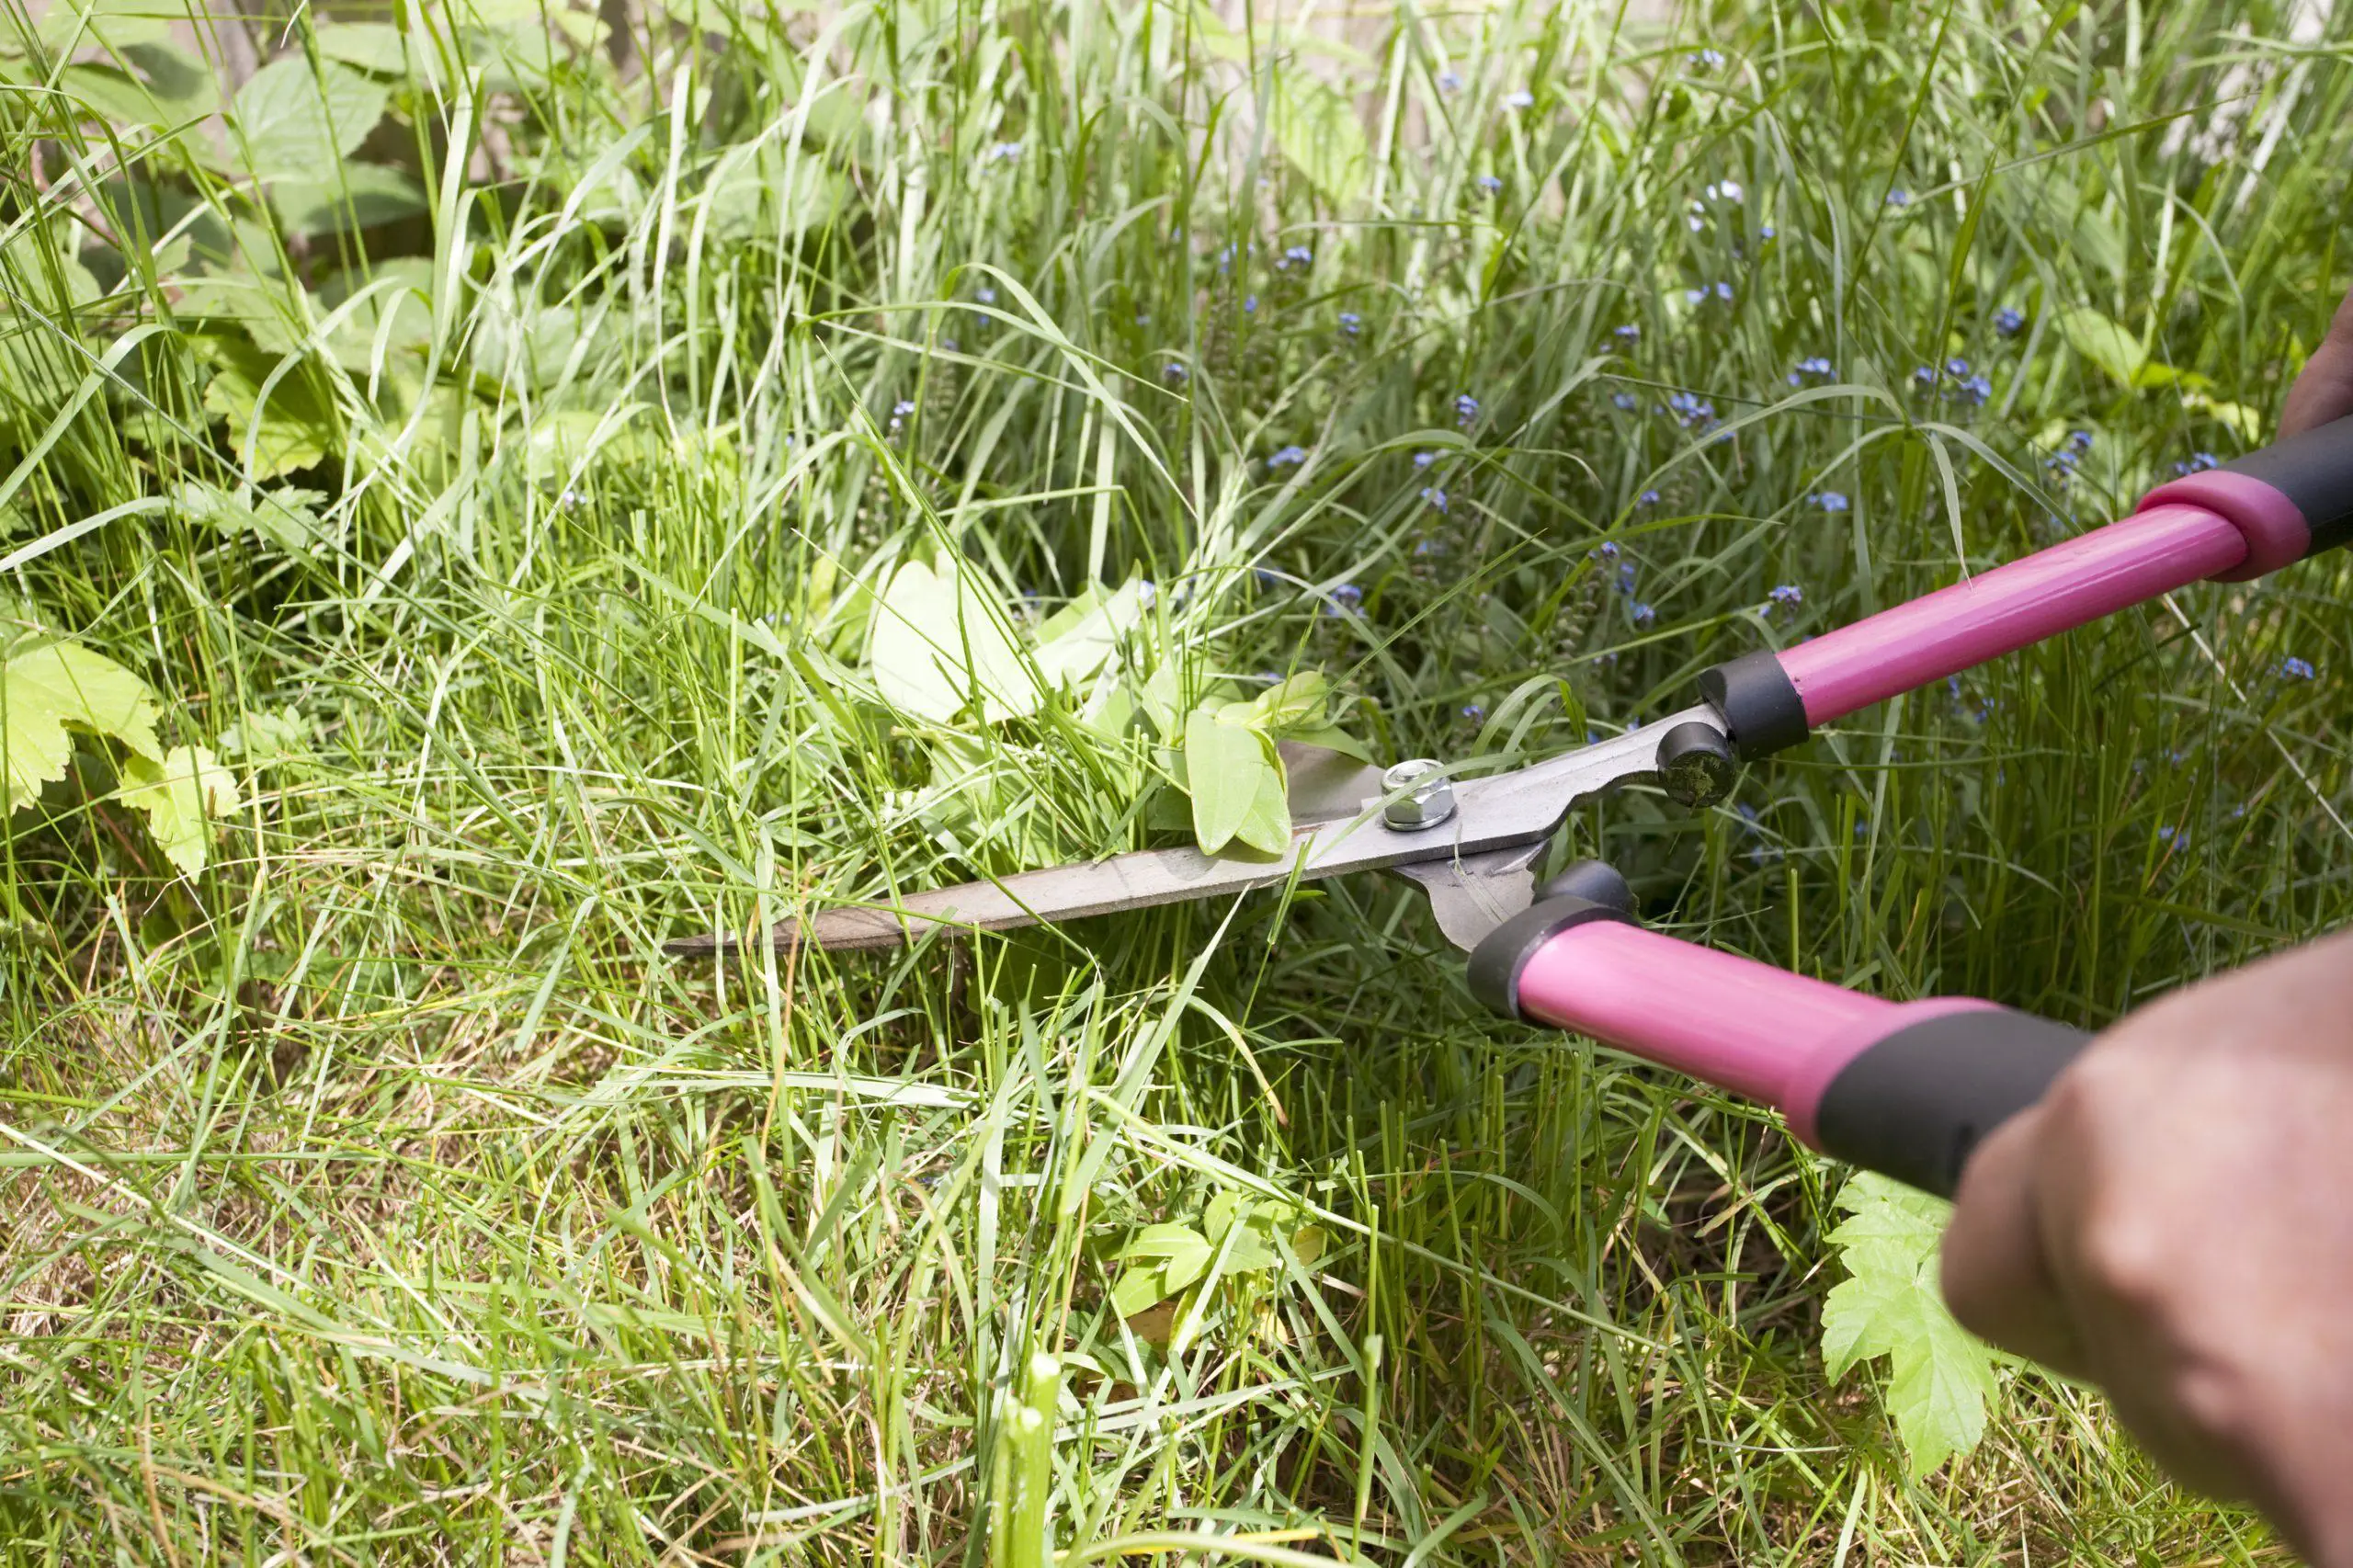 Cutting weeds to keep them under control